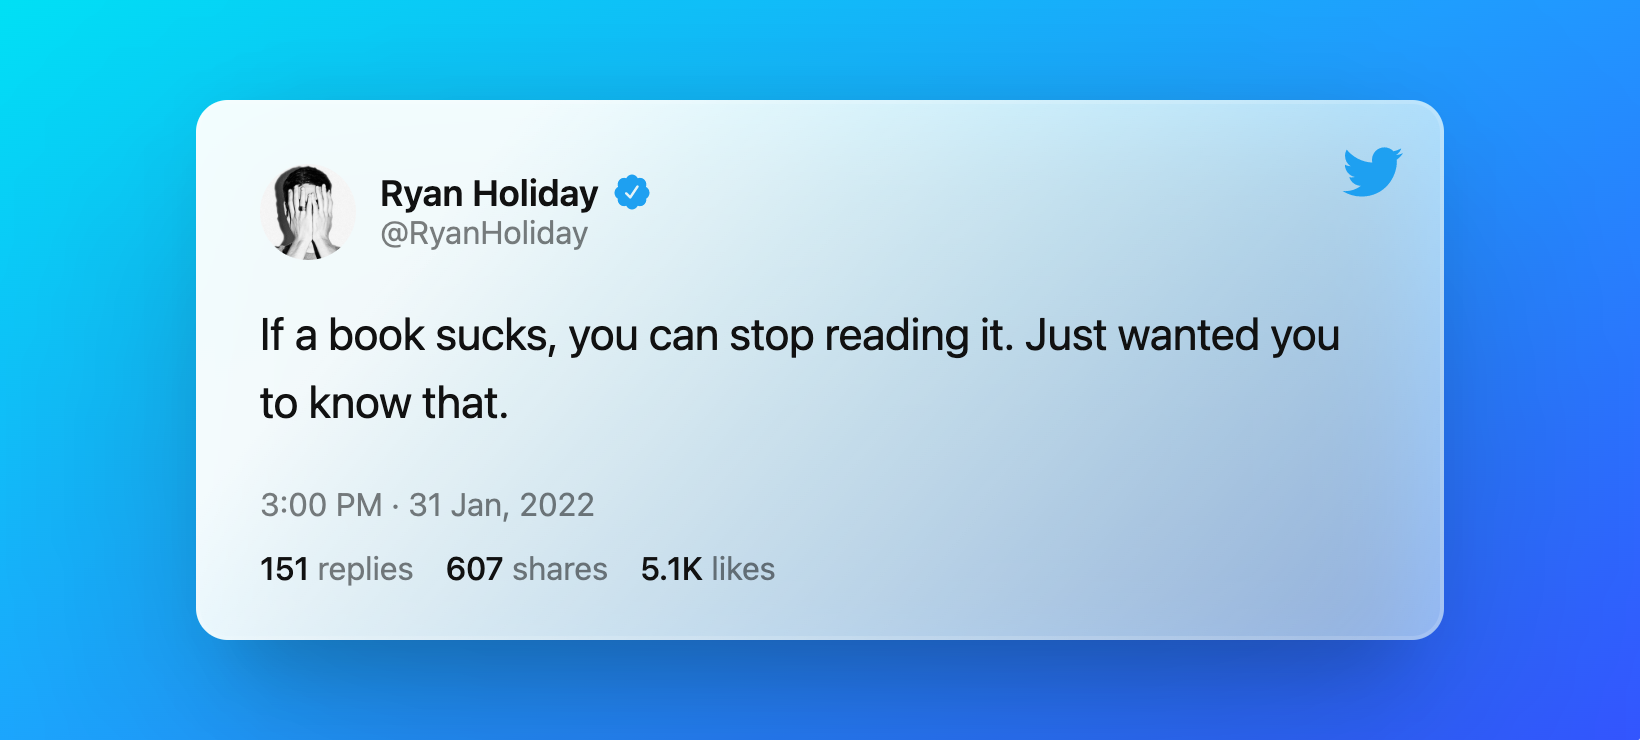 Tweet - you can stop reading bad books